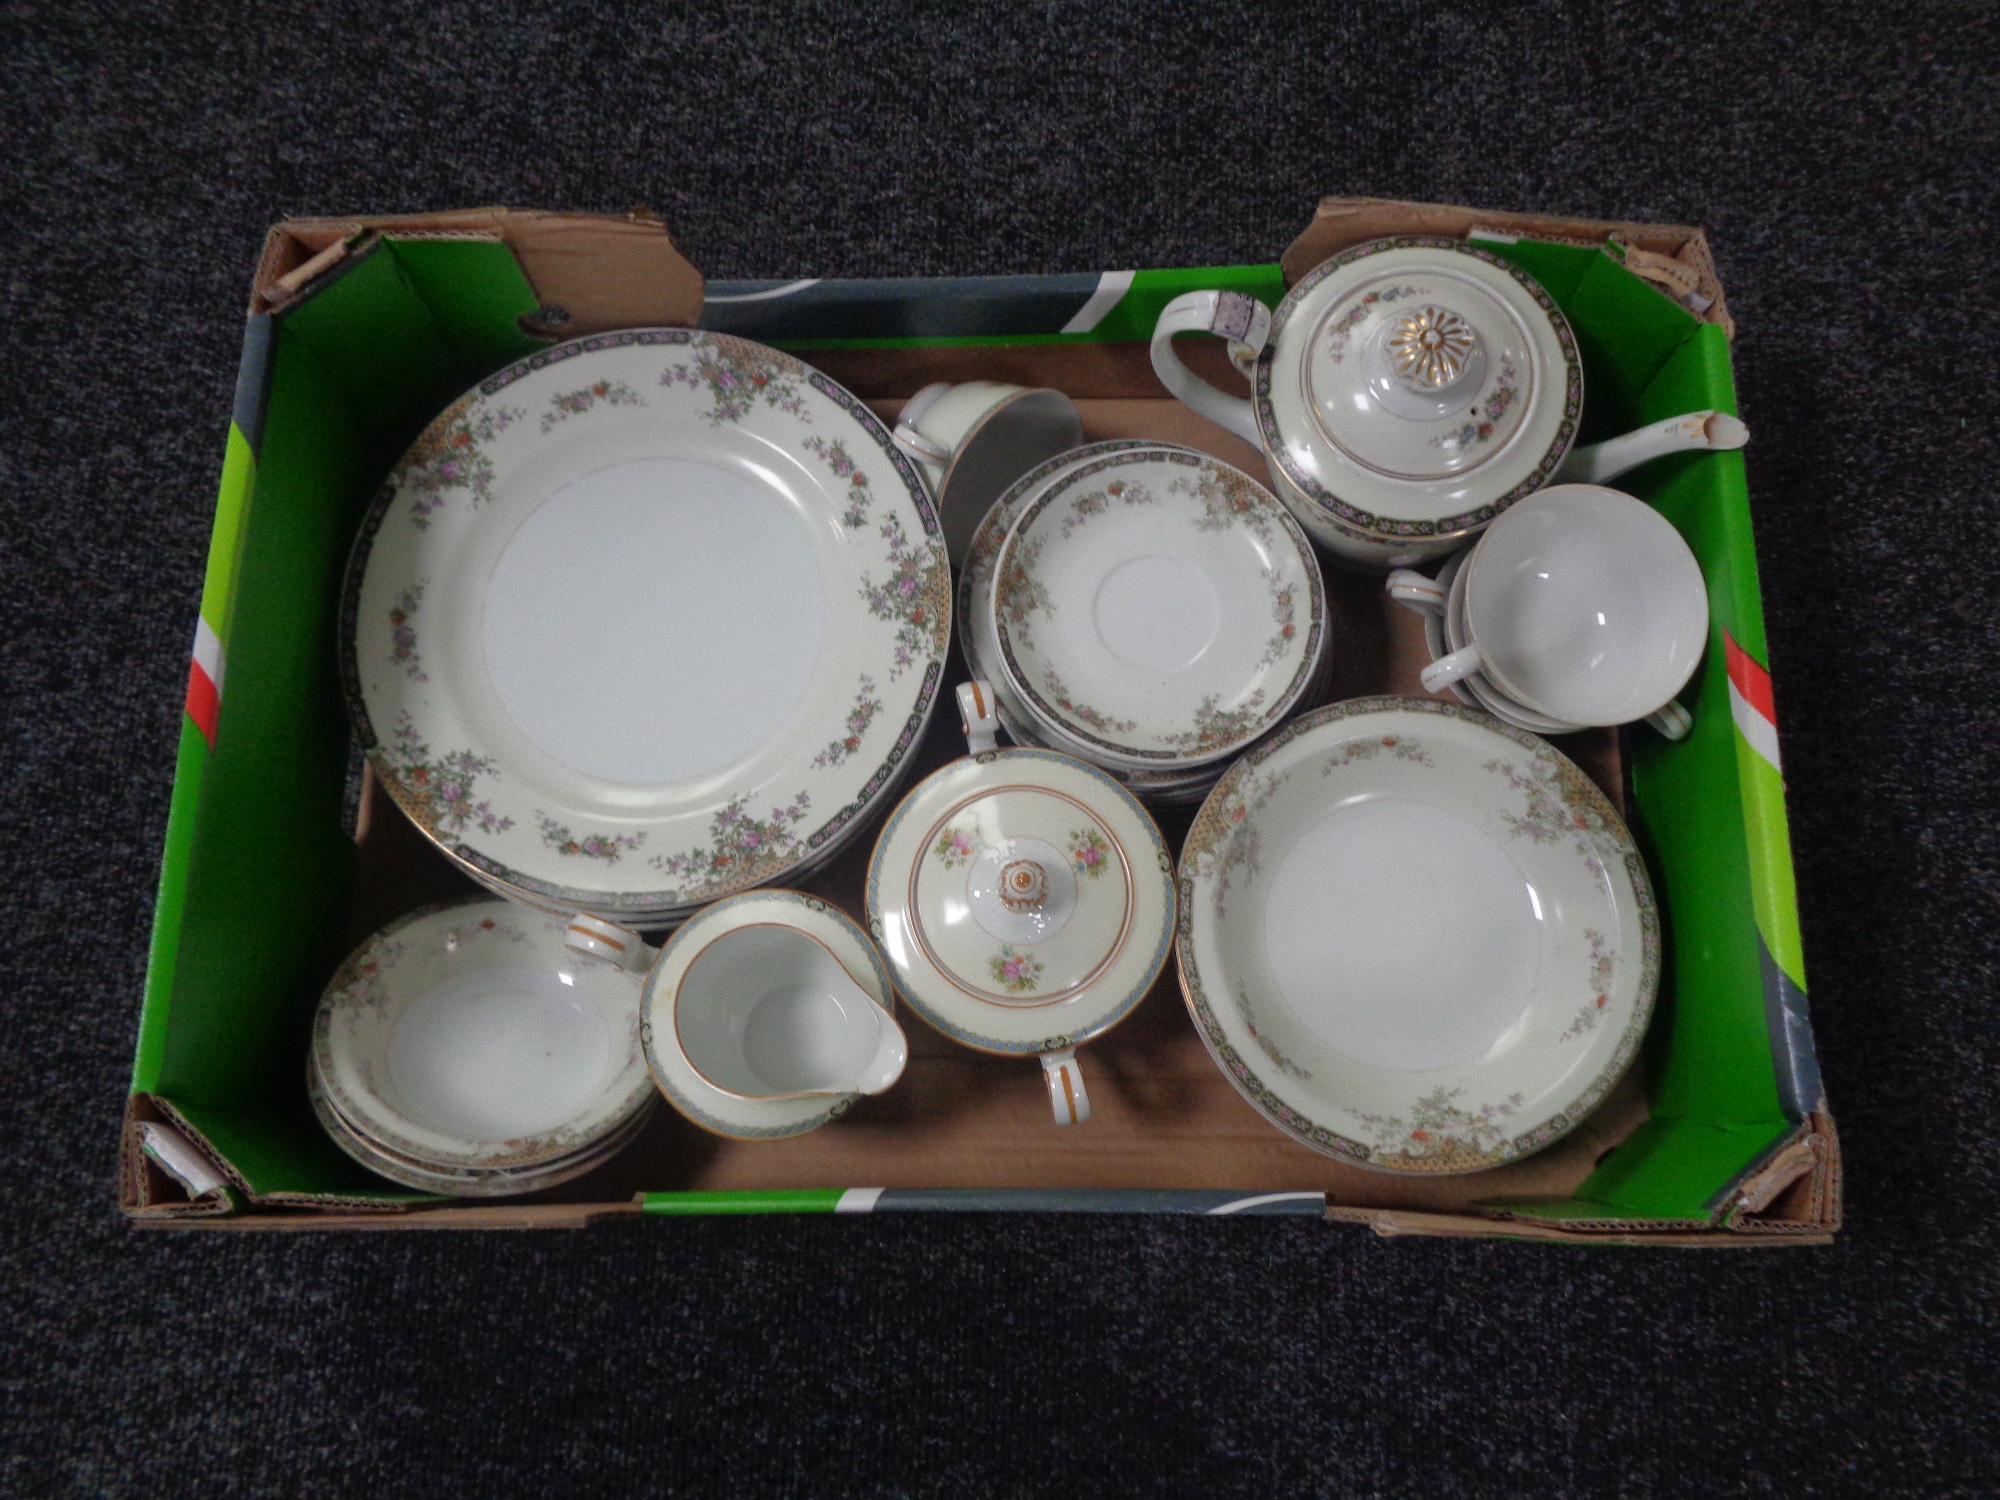 A box containing a Japanese tea and dinner service.